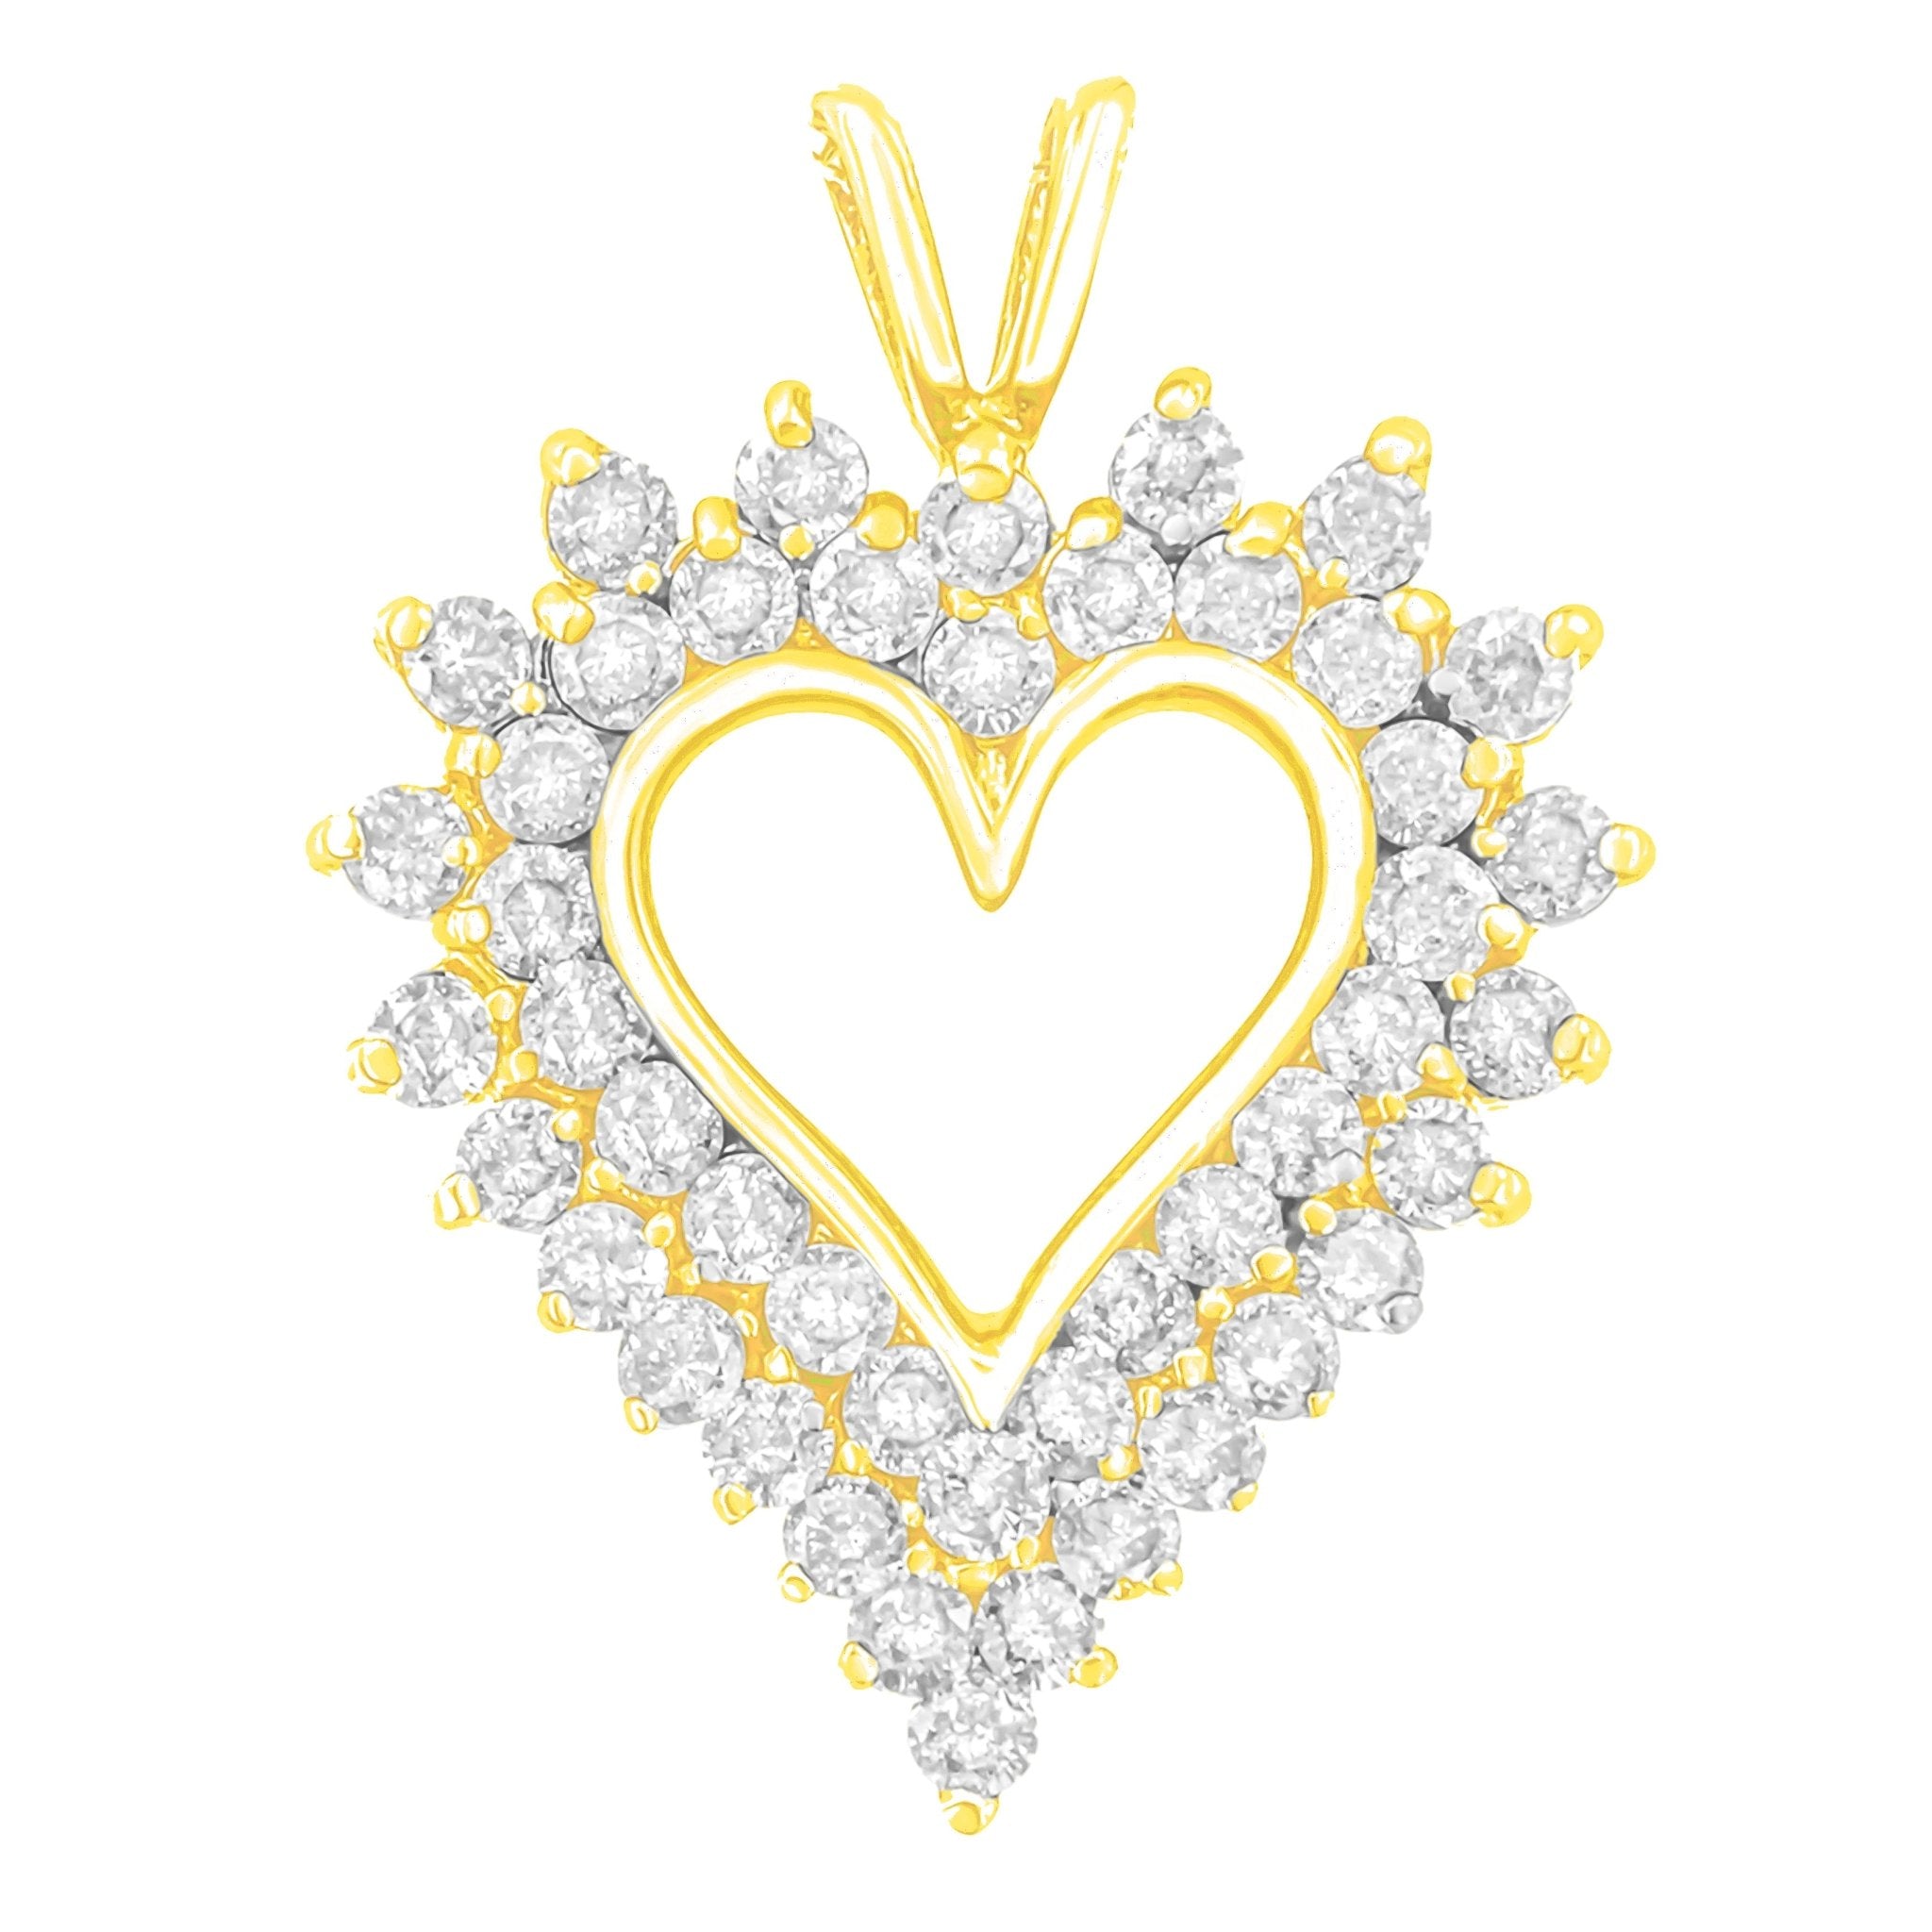 14K Yellow Gold Plated .925 Sterling Silver 3.00 Cttw Round Cut Diamond Cluster Heart 18